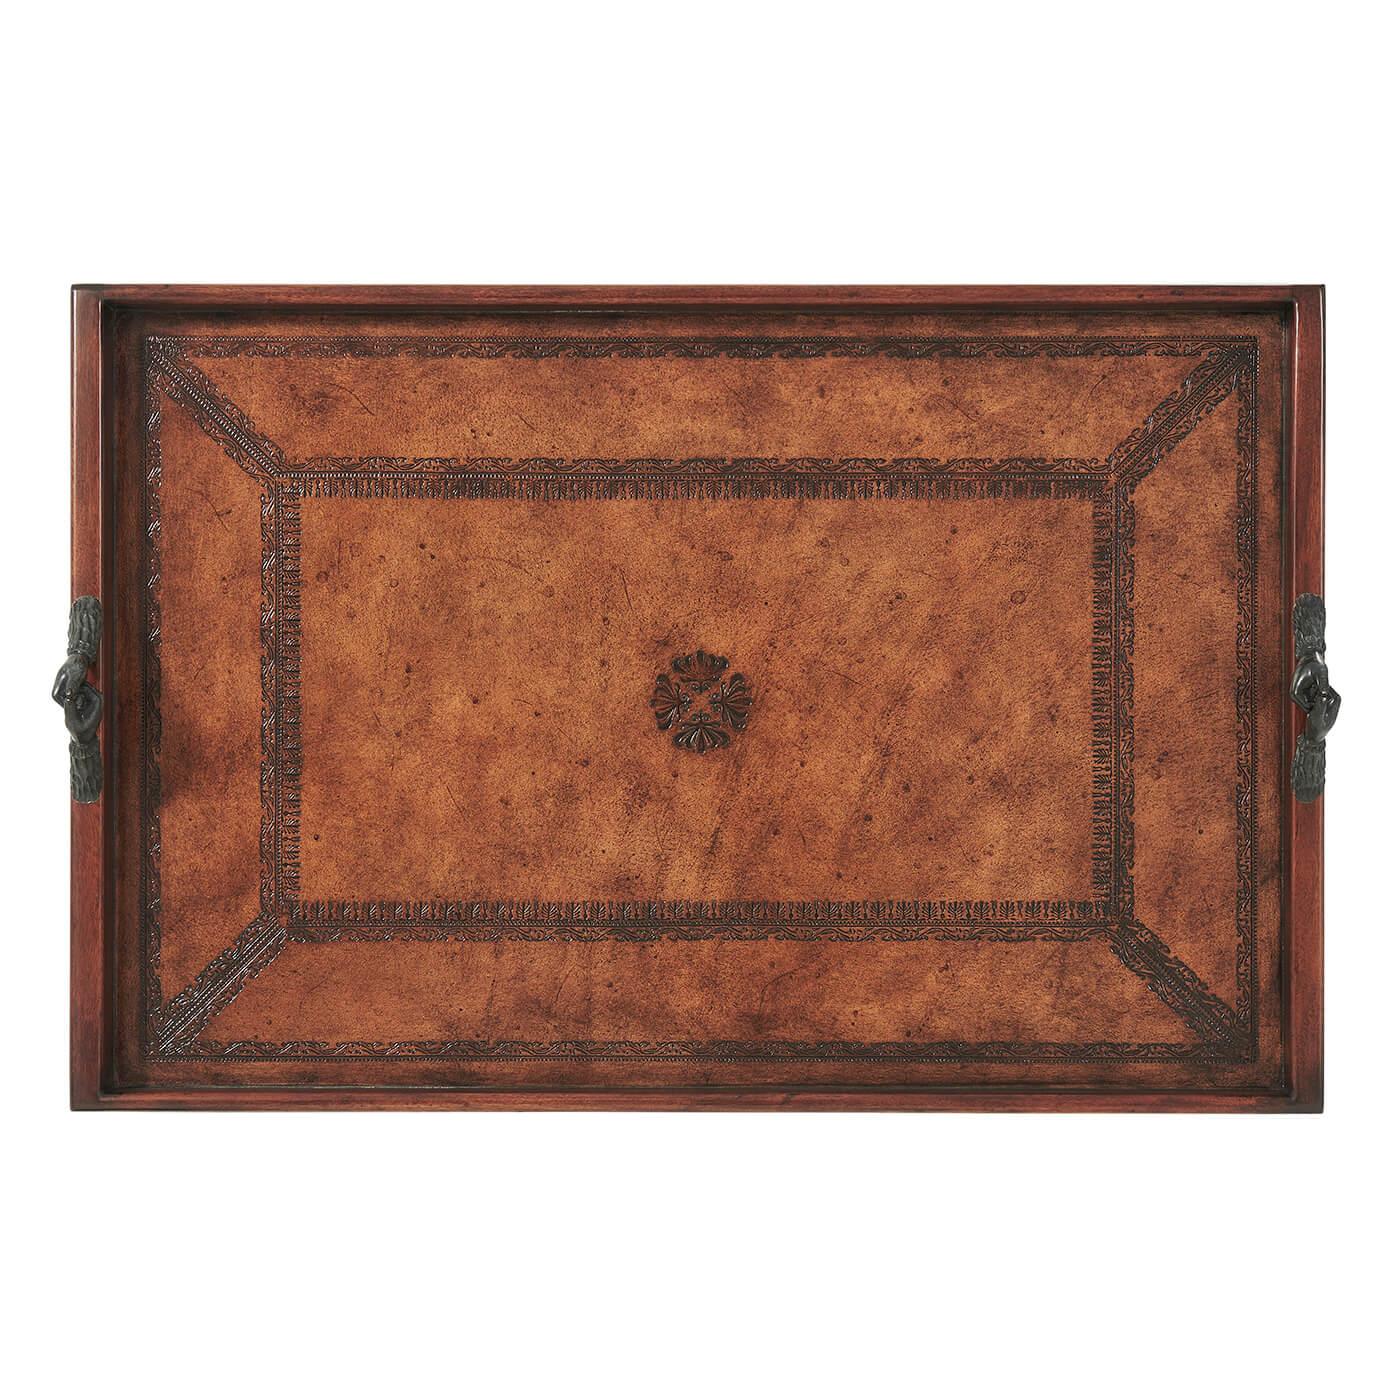 An English style brown tooled leather covered tray of rectangular shape with gallery and brass handles of clasping hands. 

Dimensions: 31.5